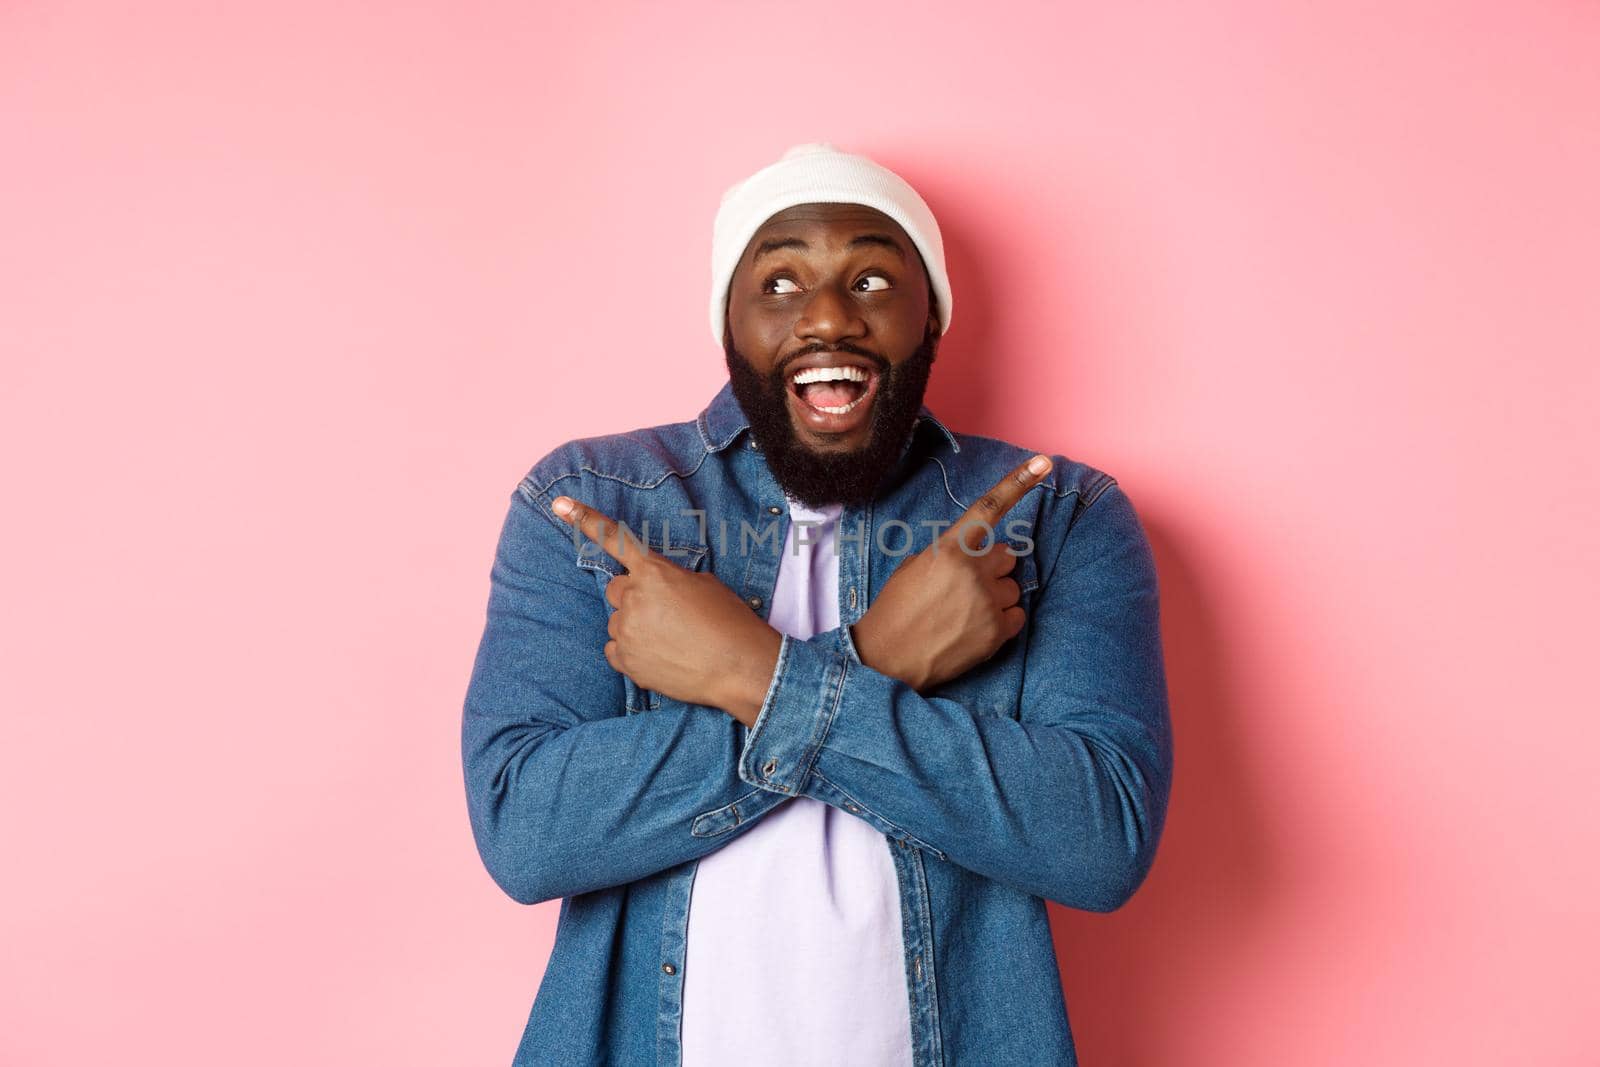 Excited young african-american man pointing sideways, showing two choices and making decision, smiling happy, standing over pink background.